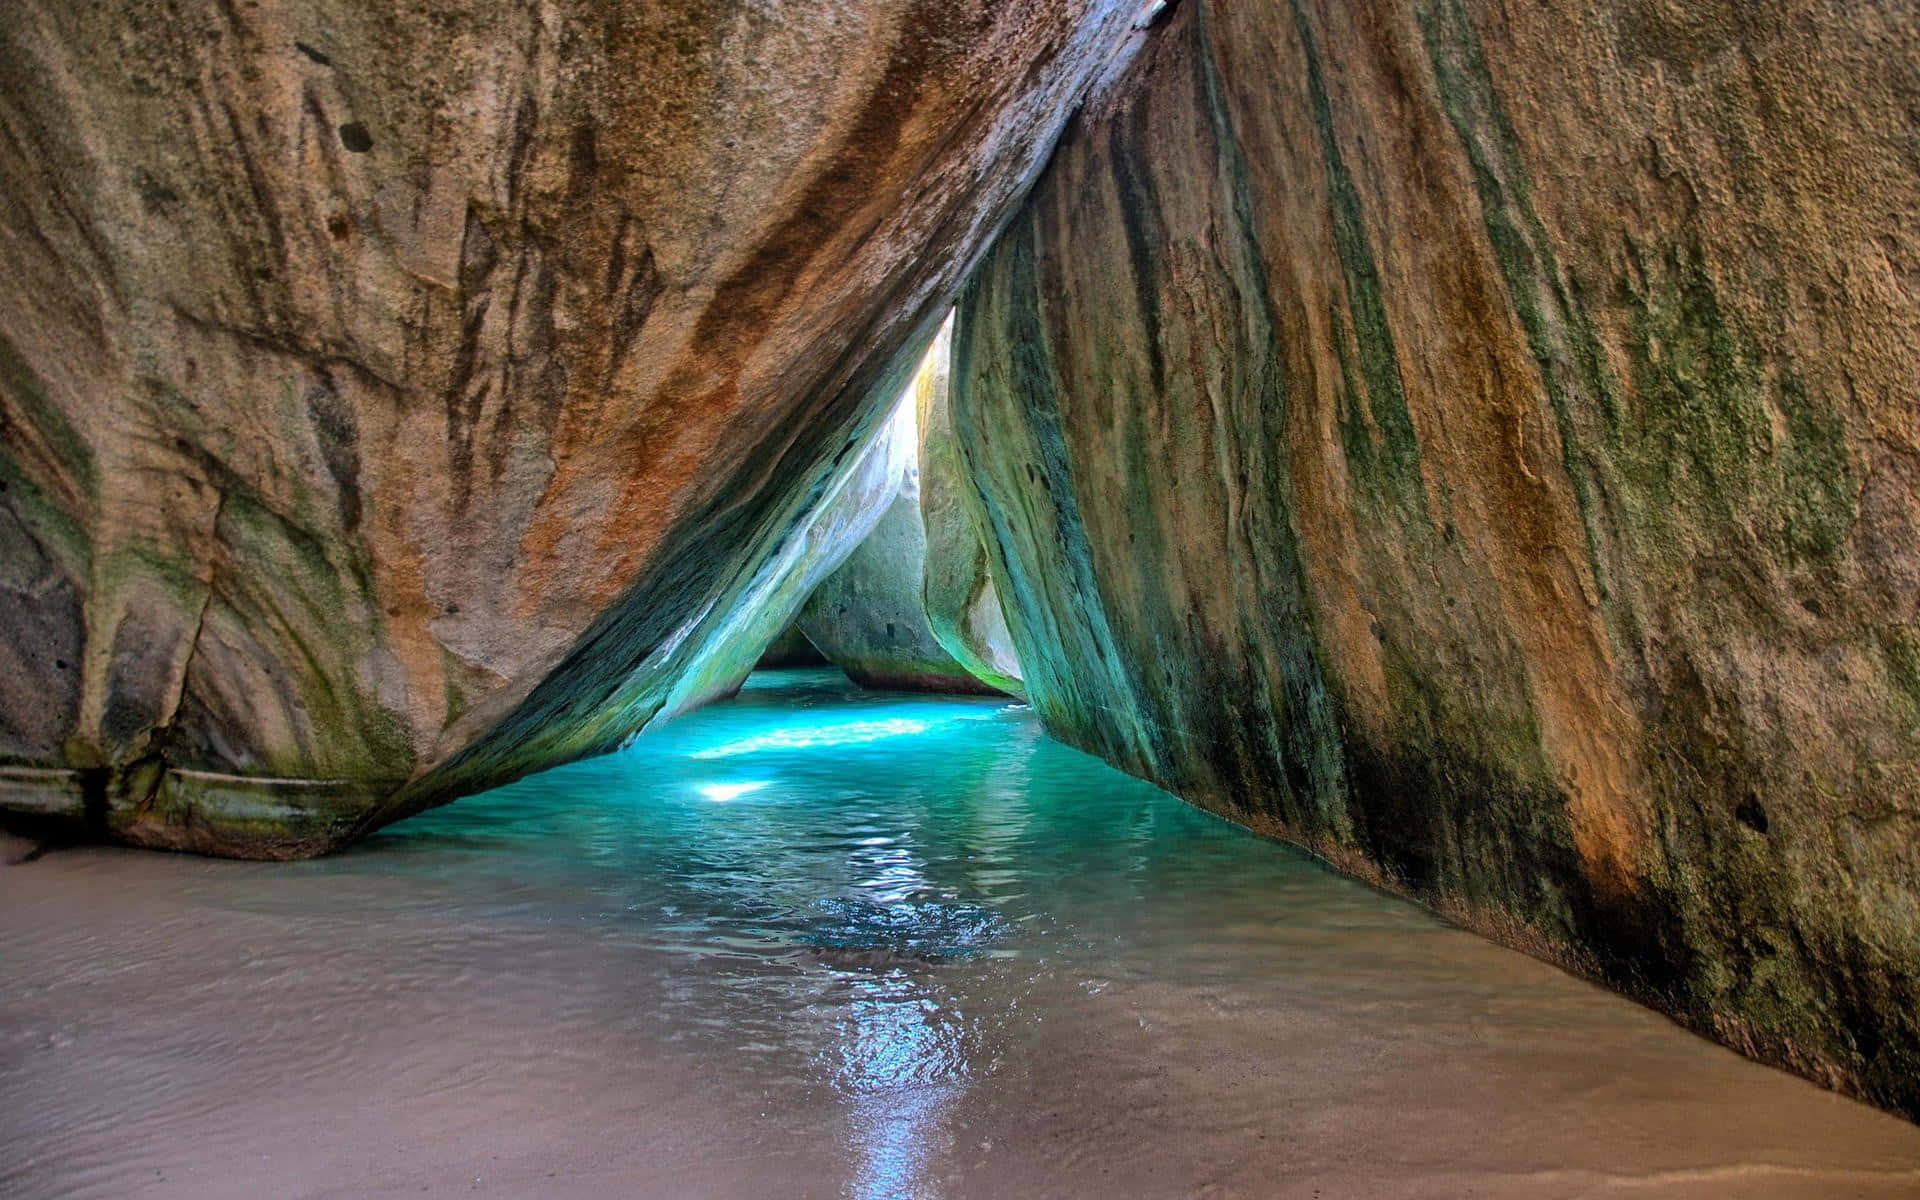 Majestic Cave Formation with Sunbeams Penetrating Through